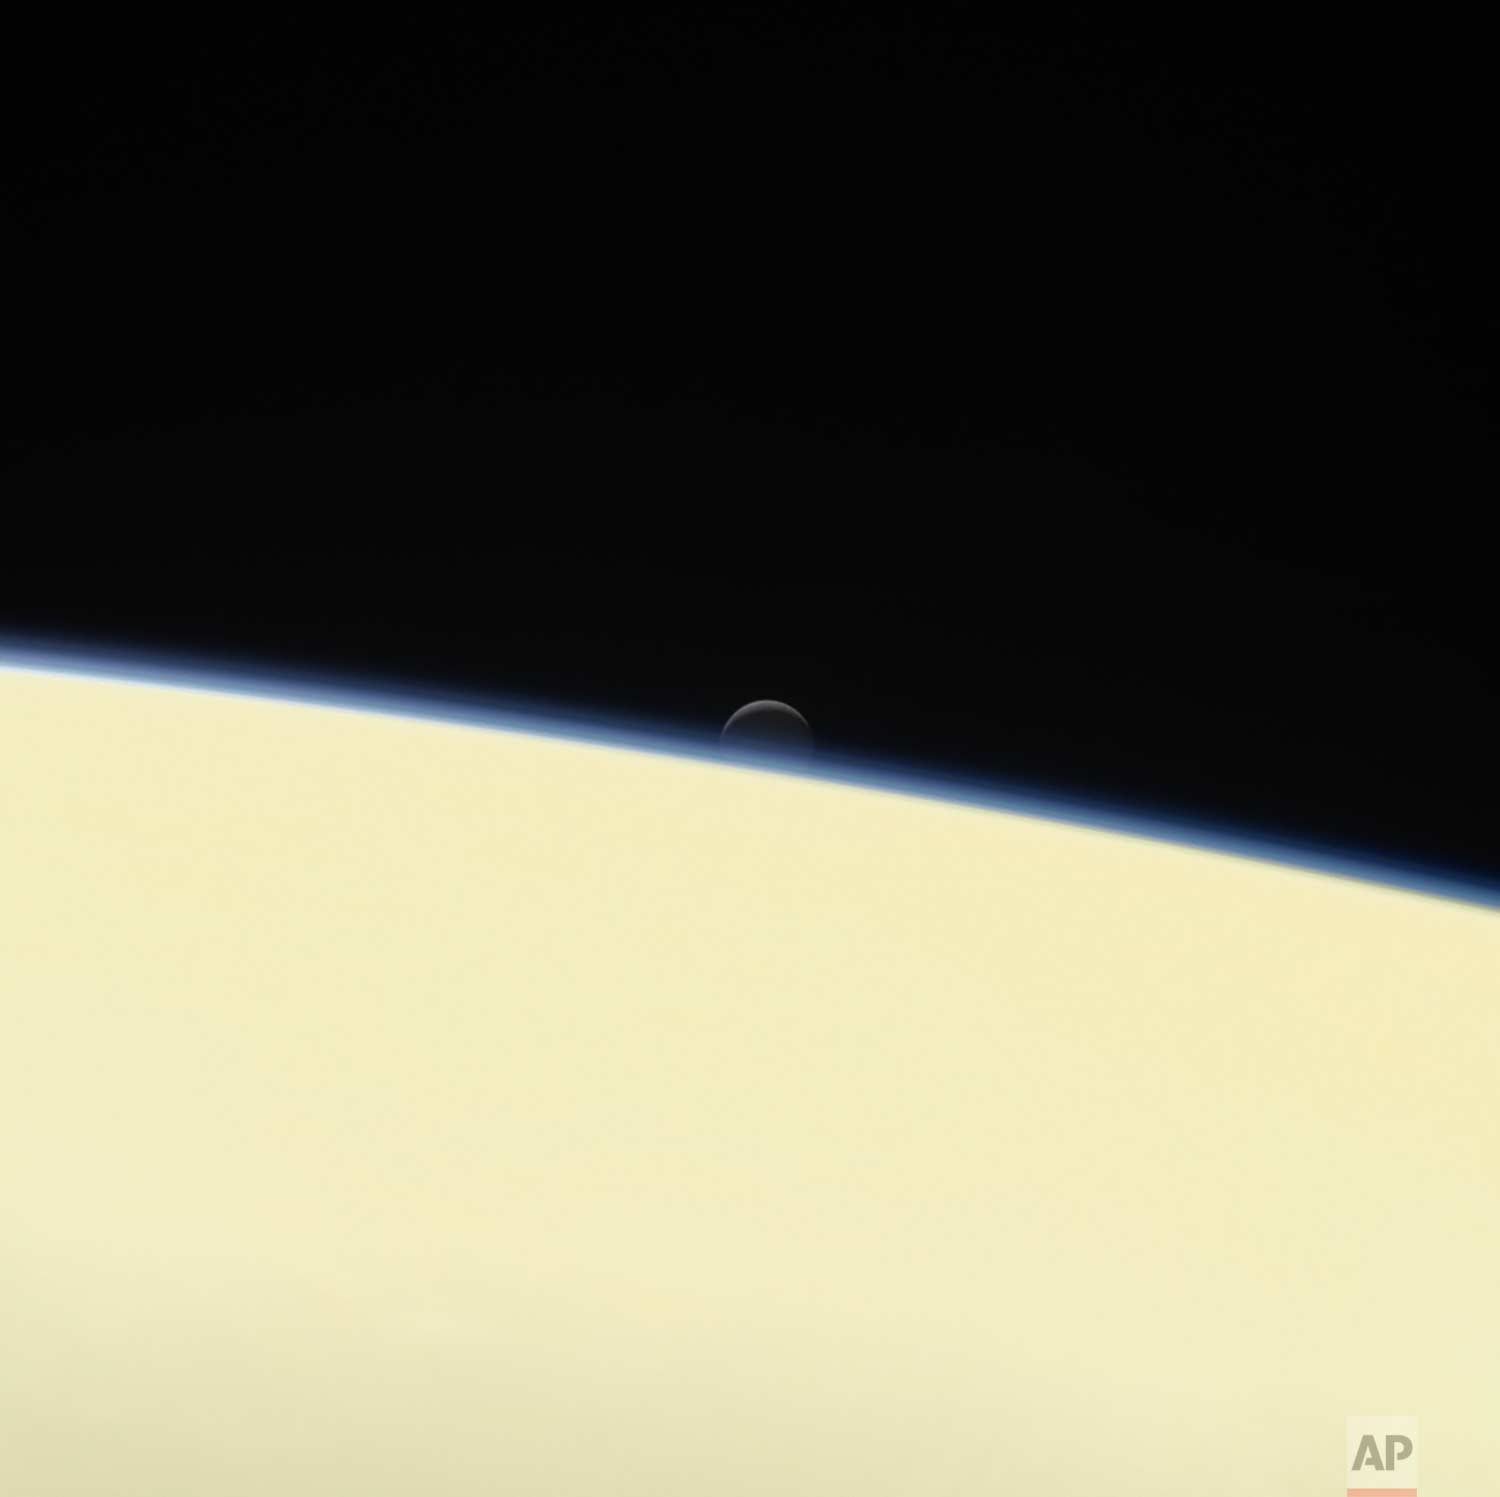  This image made available by NASA shows the moon Enceladus and the edge of Saturn as seen from the Cassini spacecraft on its descent towards the planet on Wednesday, Sept. 13, 2017. The probe disintegrated in the skies above Saturn early Friday, Sep